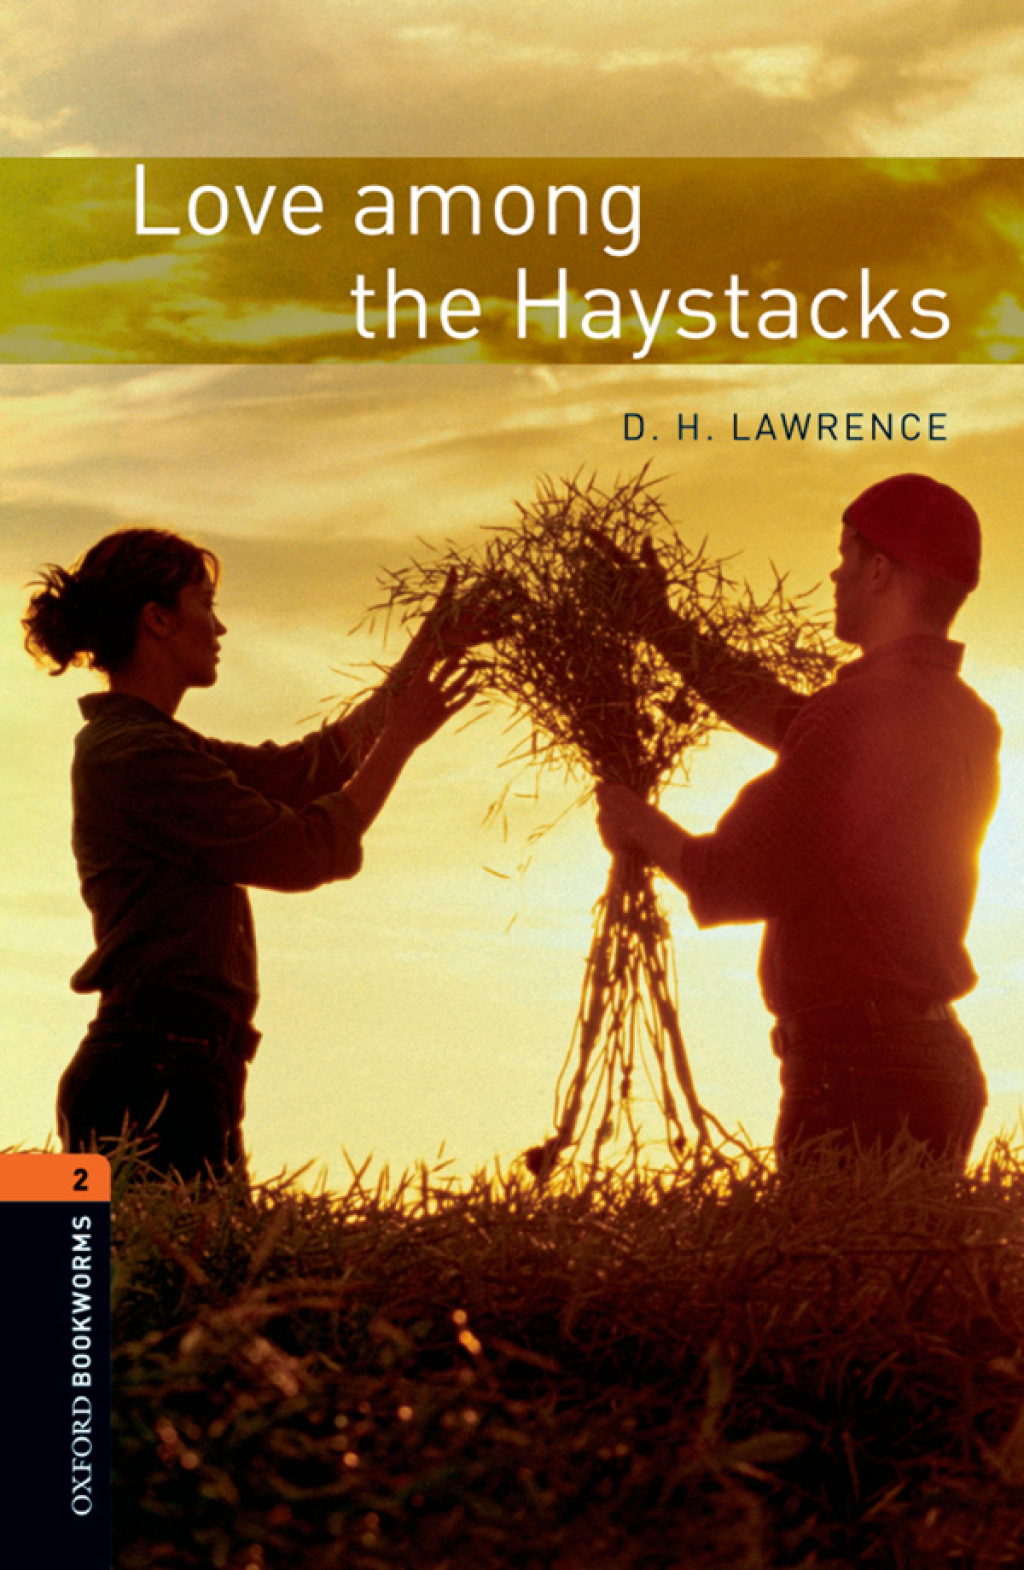 Love among the Haystacks Level 2 Oxford Bookworms Library - 3rd Edition (eBook Rental)